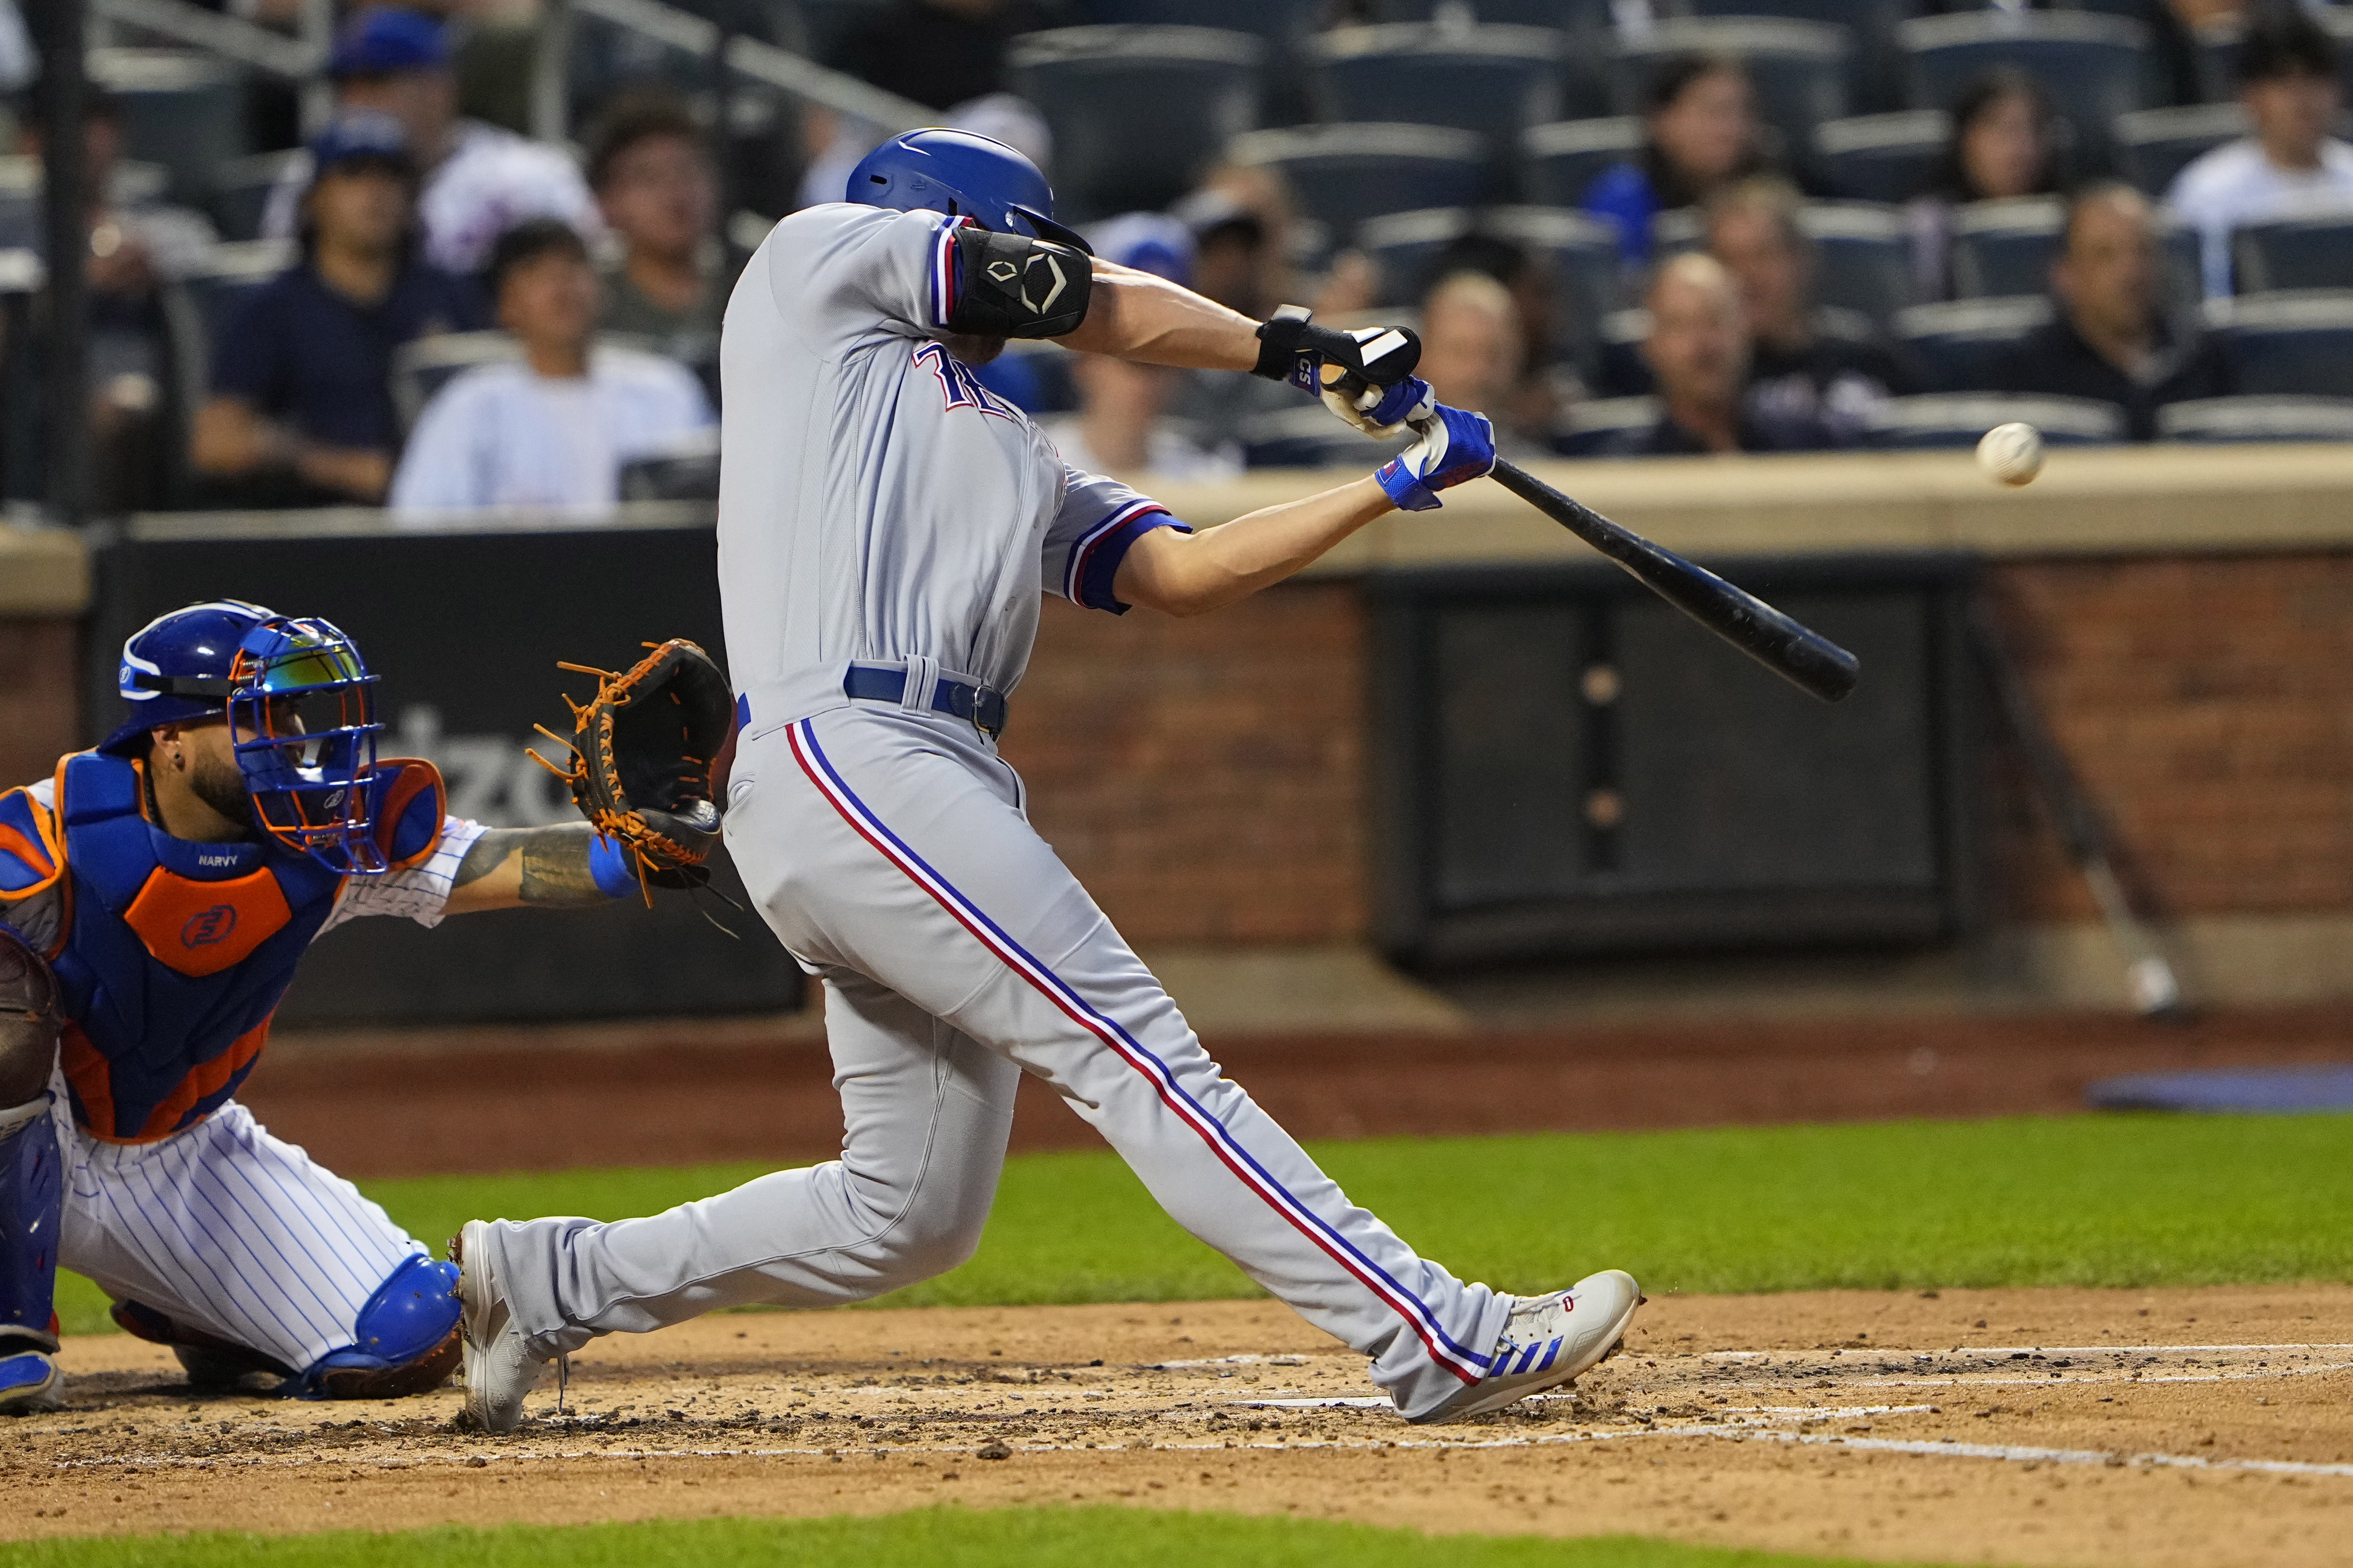 Texas Rangers All-Star Corey Seager's Bat Looks Old, Causes Social Media  Stir - Sports Illustrated Texas Rangers News, Analysis and More